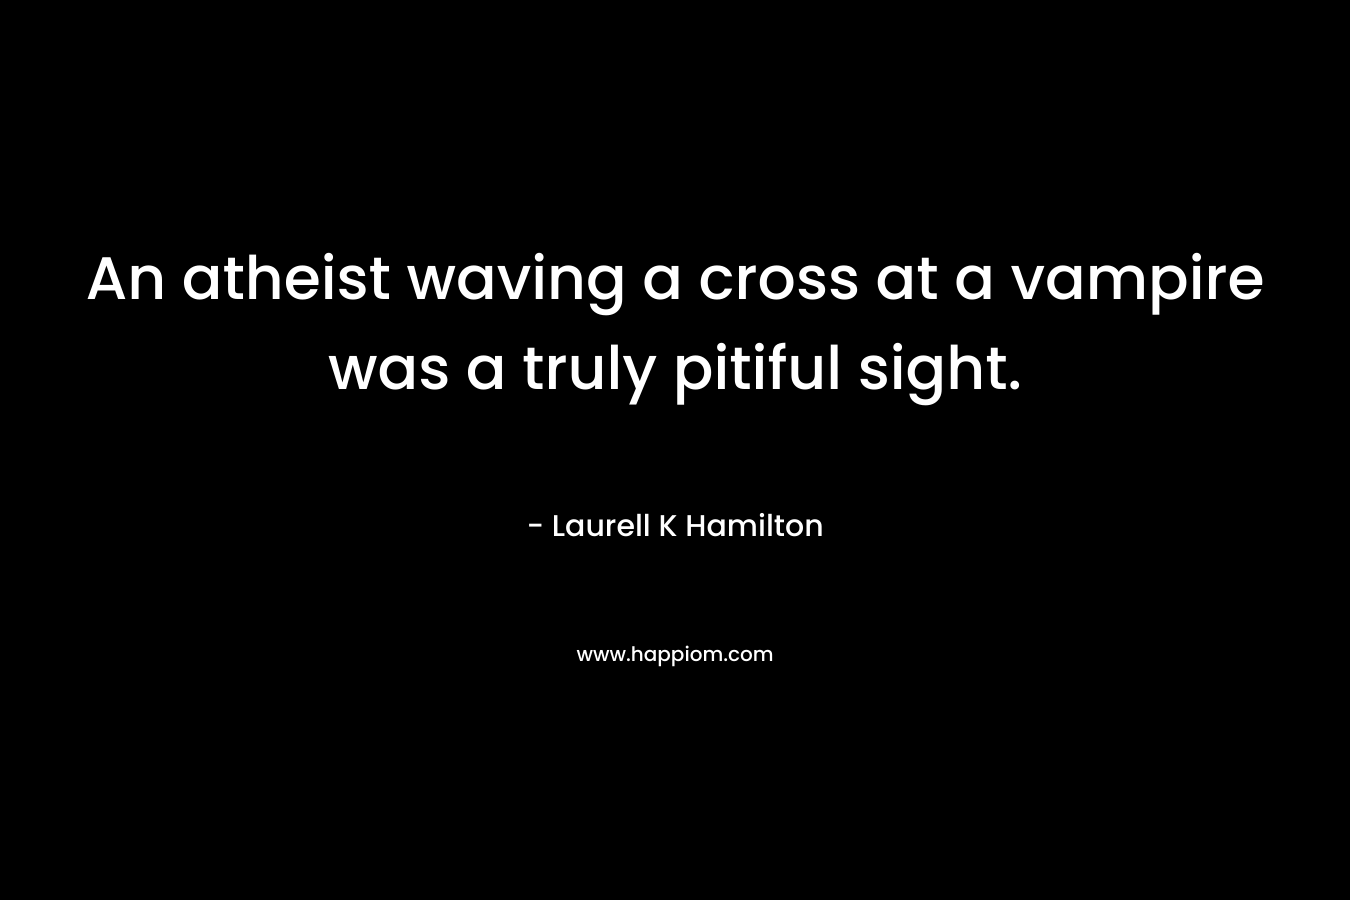 An atheist waving a cross at a vampire was a truly pitiful sight. – Laurell K Hamilton